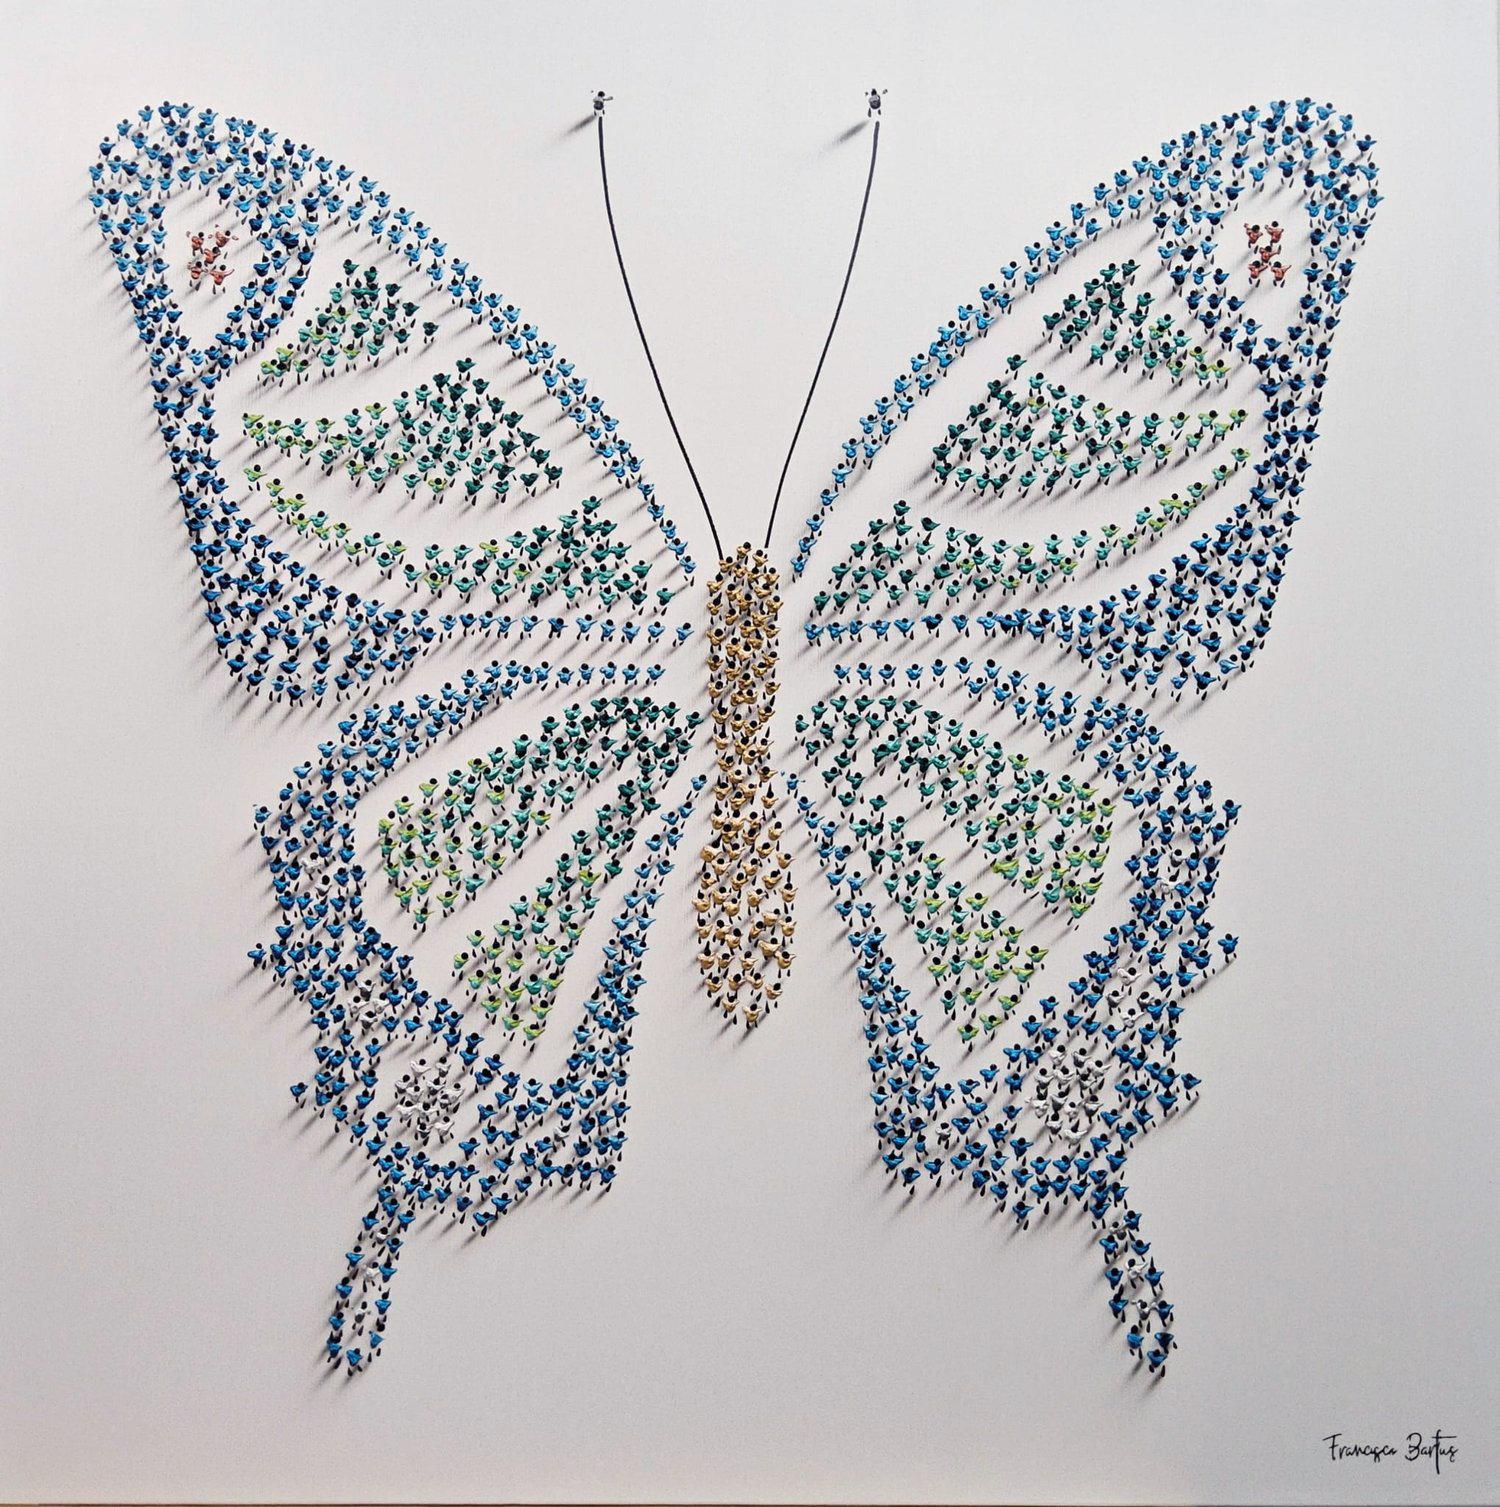 This piece, "Emerging", is a 47x47 mixed media painting on canvas by artist Francisco Bartus. Featured is an outline of a butterfly with wings fully spread. All made up of individual helpings of paint strategically placed and formed to create the